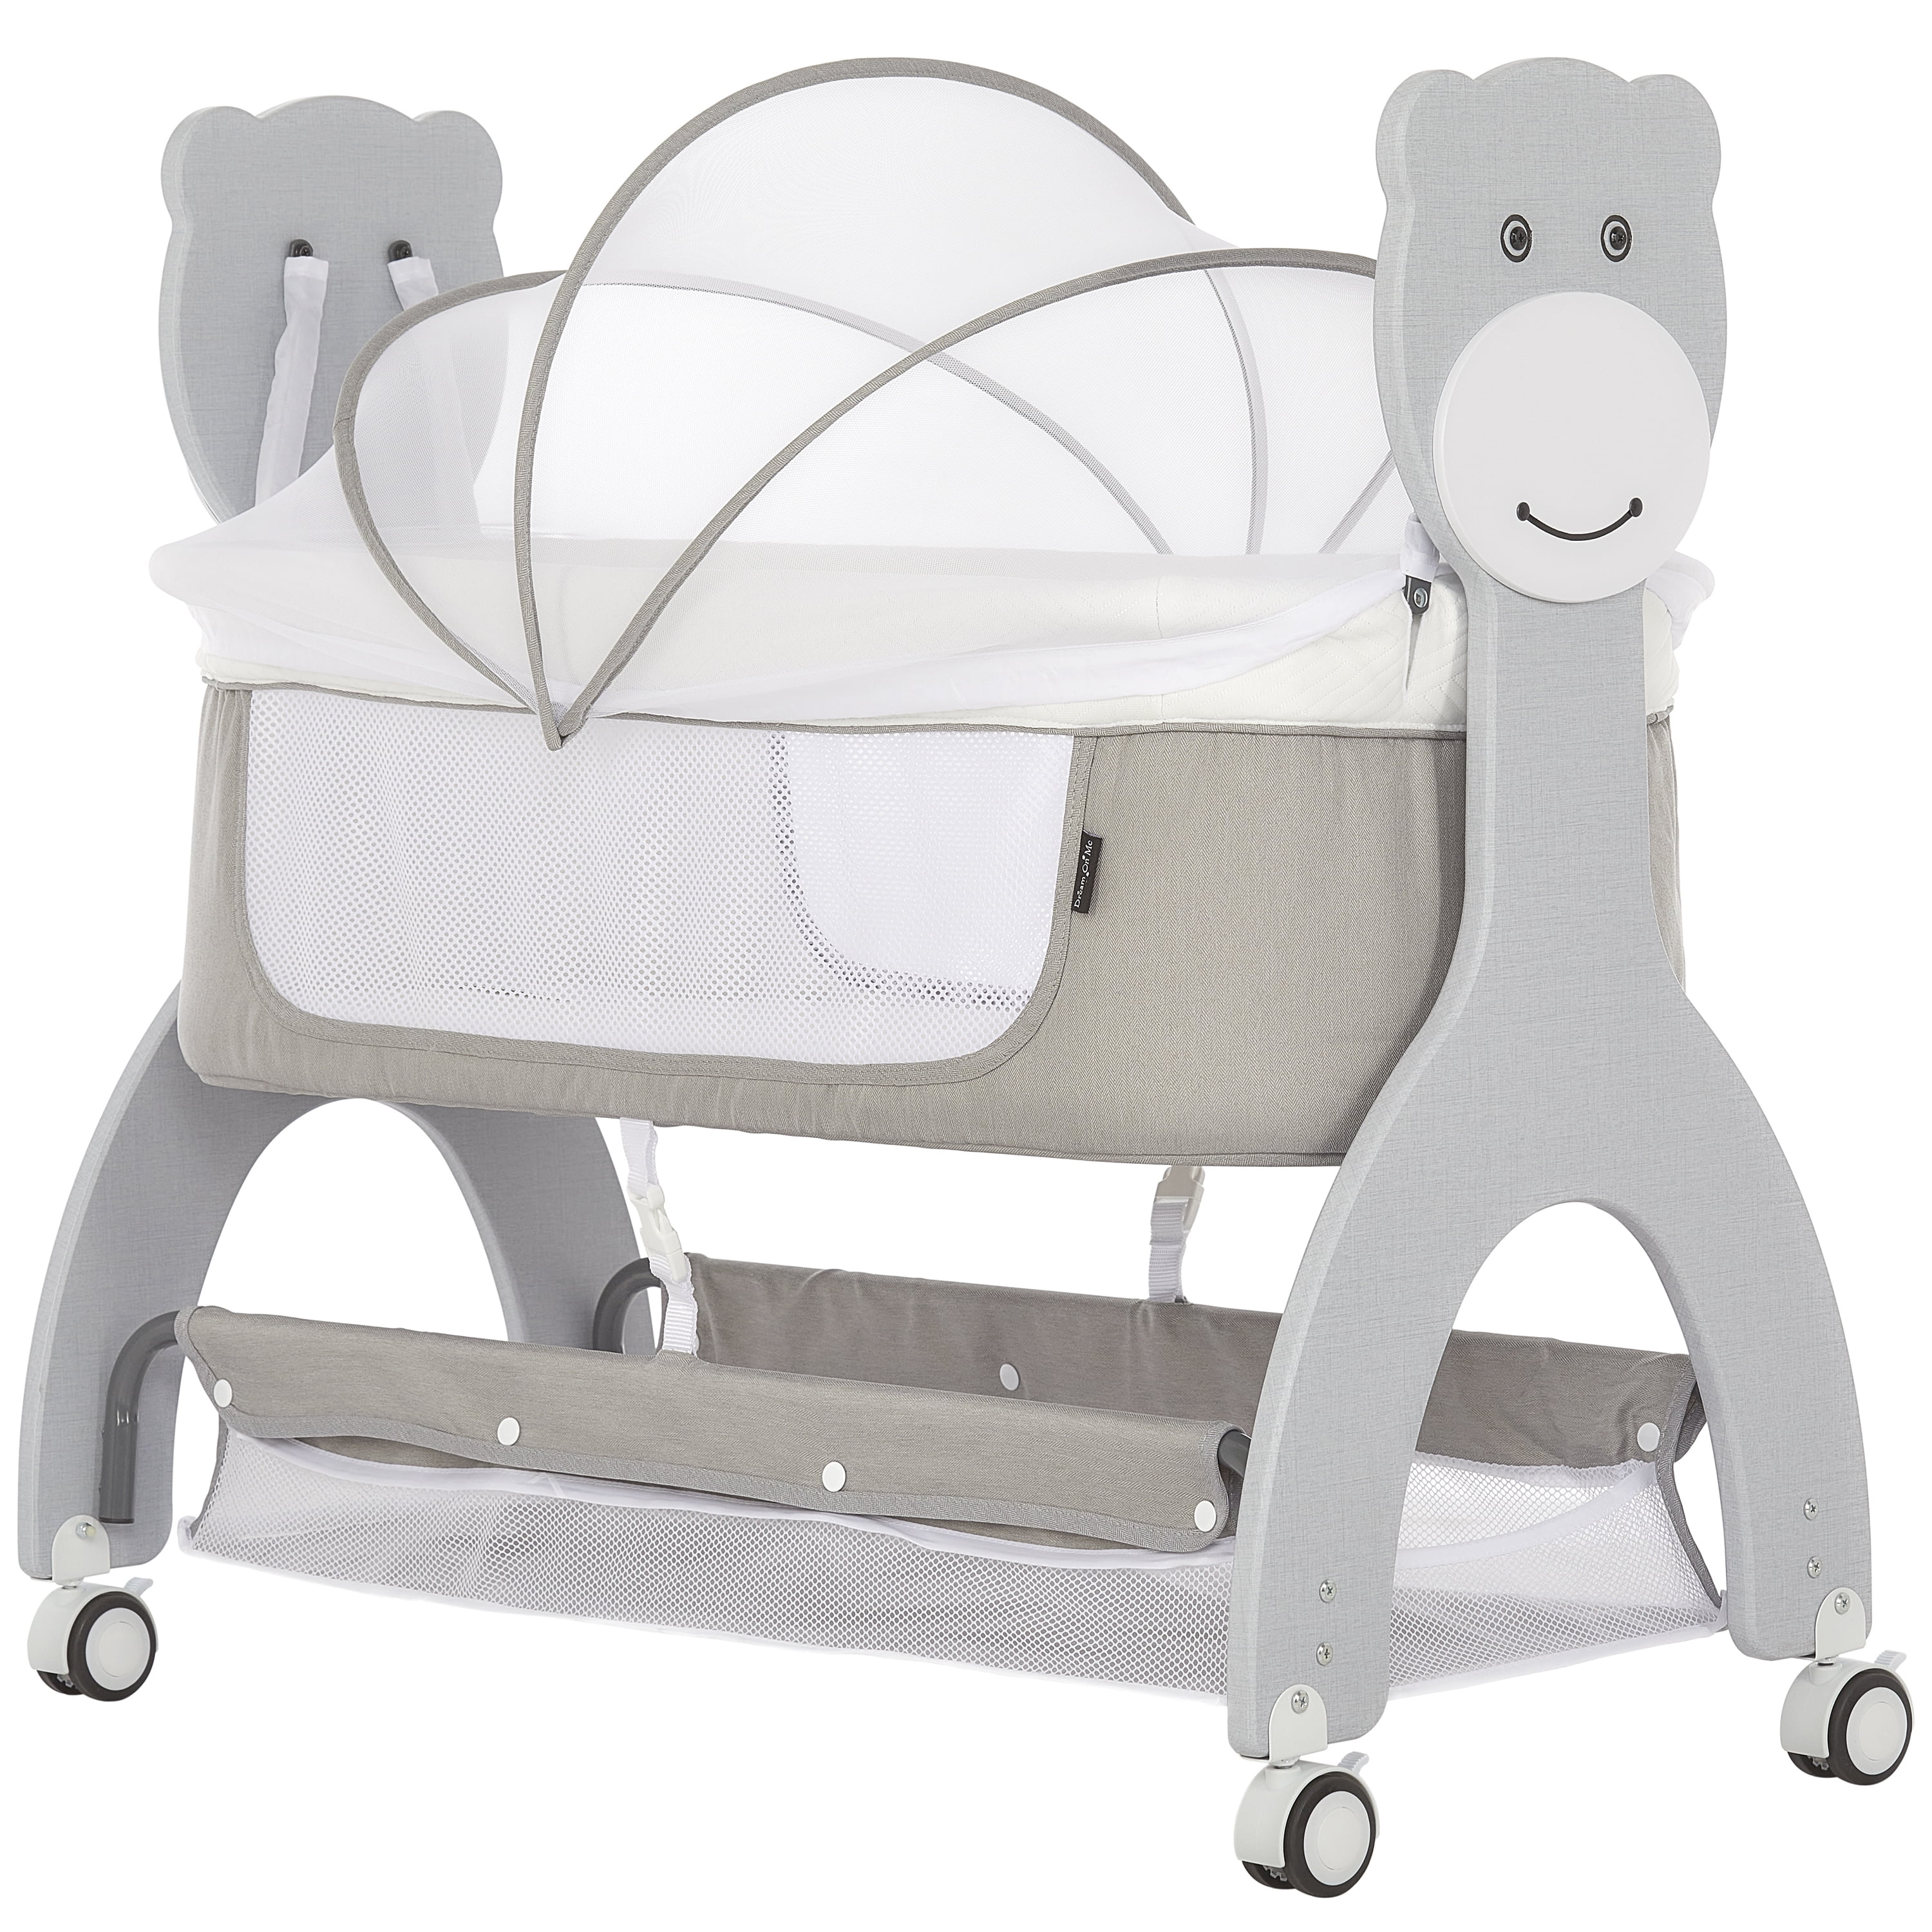 Cradle Moses Basket Holder White Baby Canopy For Rocking Crib 